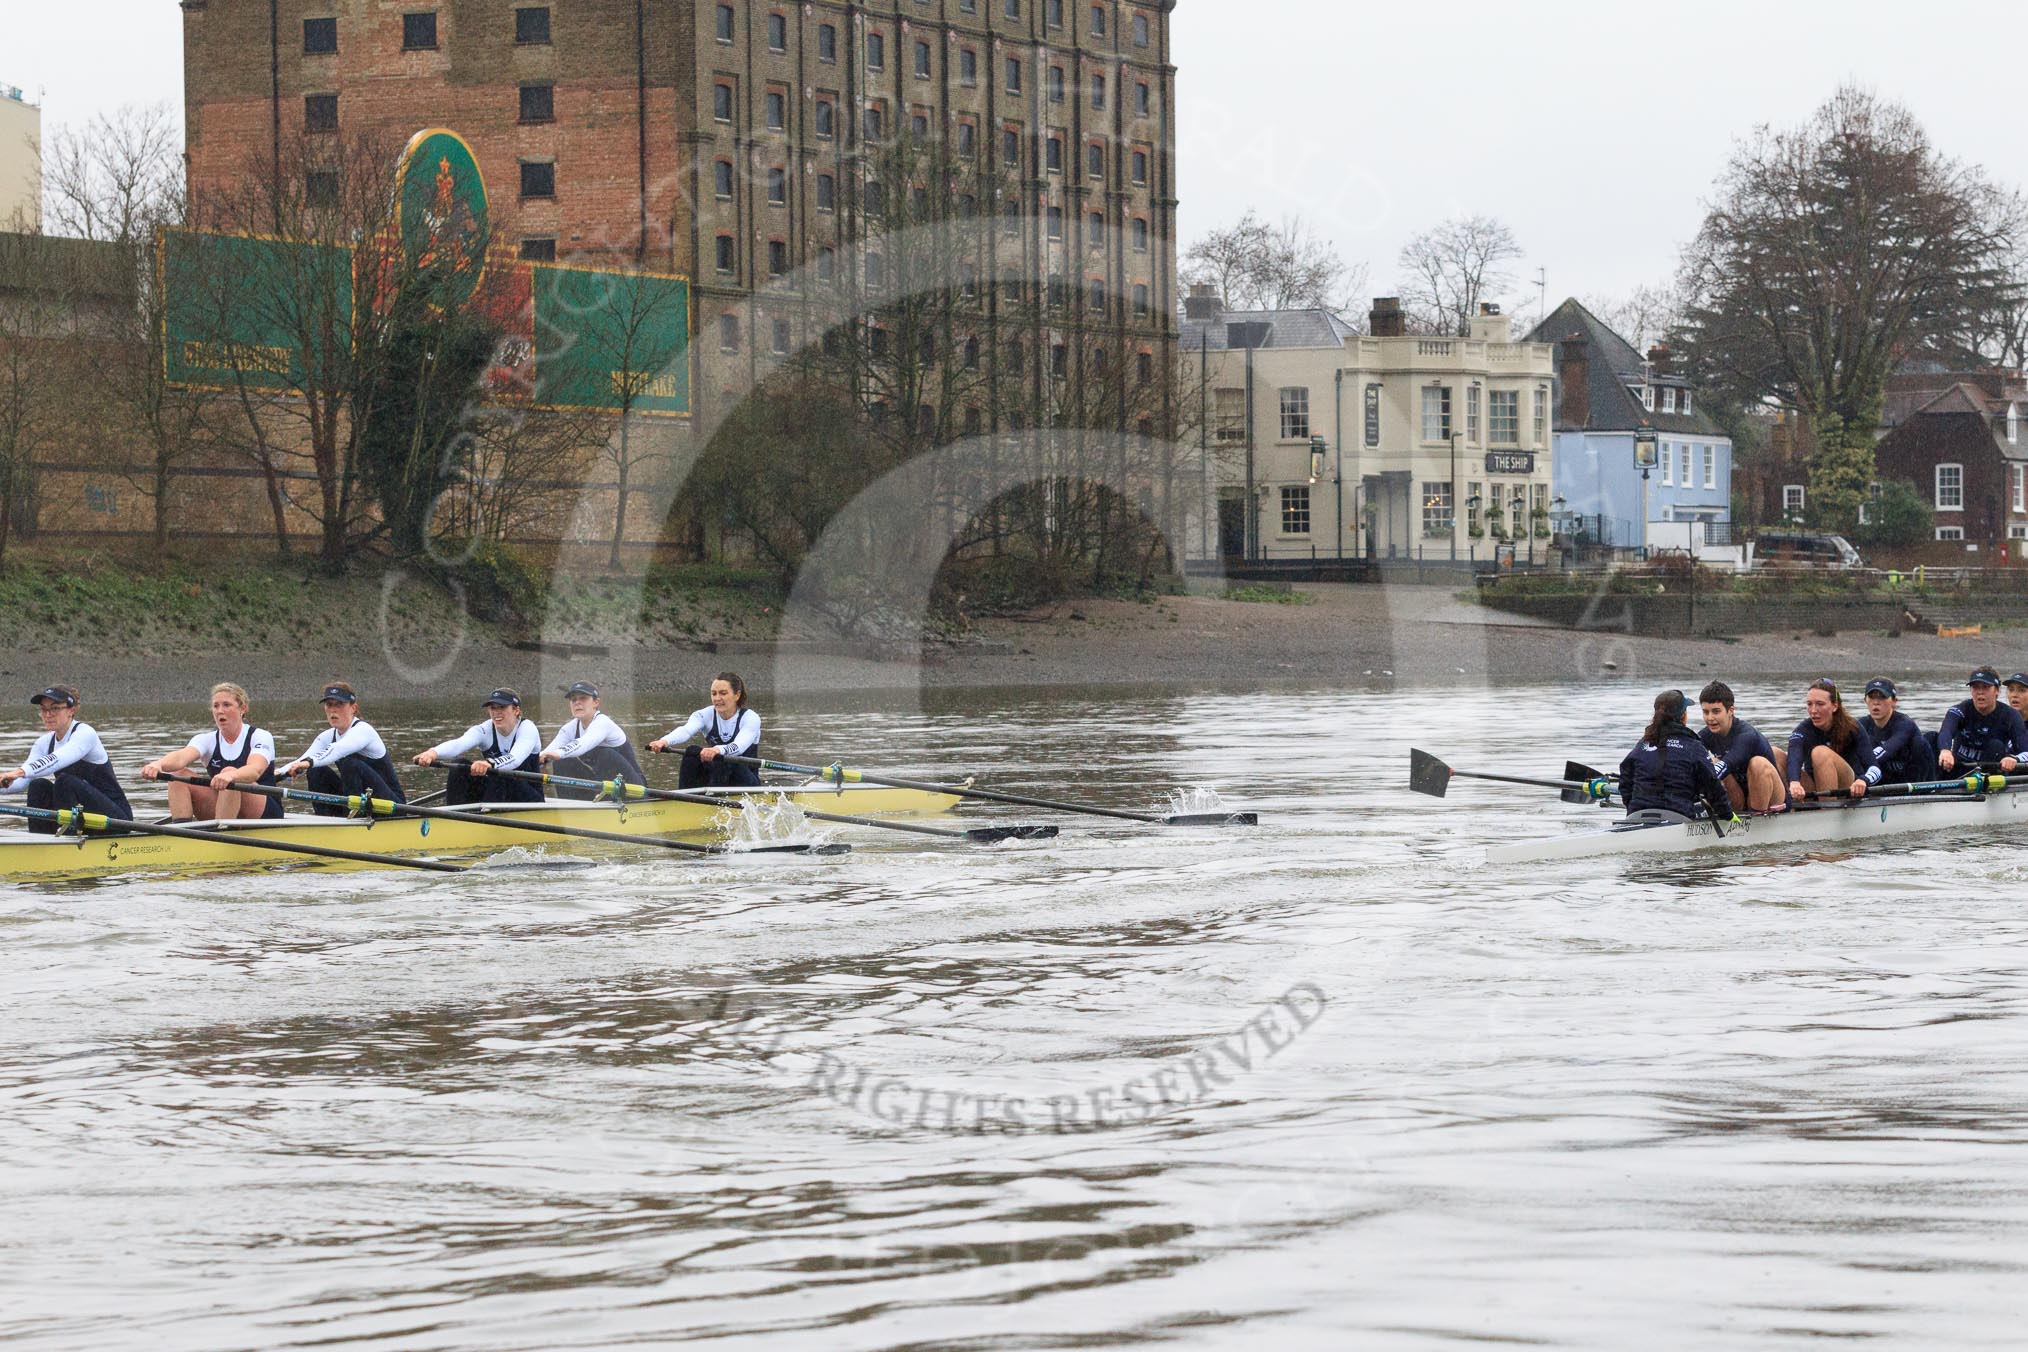 The Boat Race season 2018 - Women's Boat Race Trial Eights (OUWBC, Oxford): "Great Typhoon" and "Coursing River" close to the finish line.
River Thames between Putney Bridge and Mortlake,
London SW15,

United Kingdom,
on 21 January 2018 at 14:46, image #168